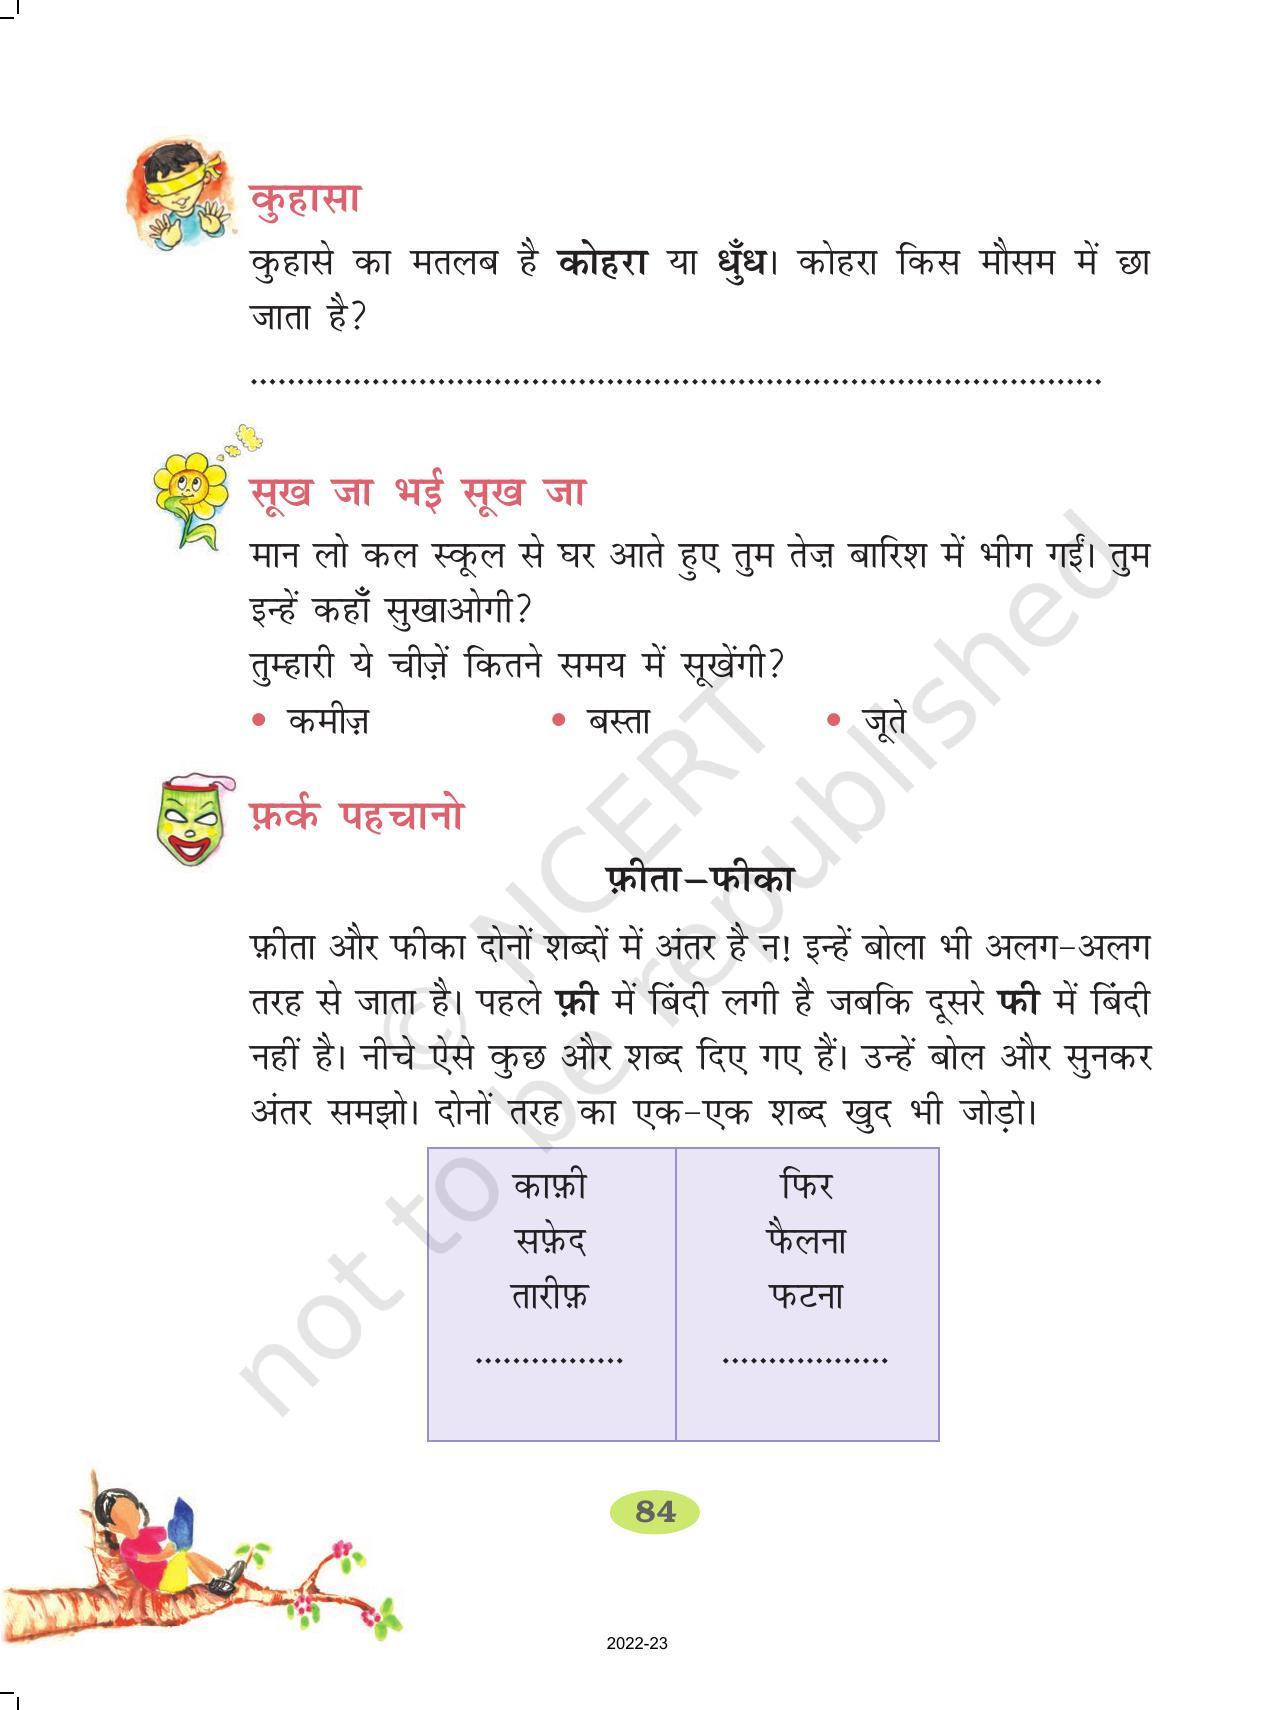 NCERT Book for Class 2 Hindi :Chapter 13-सूरज जल्दी आना जी - Page 4